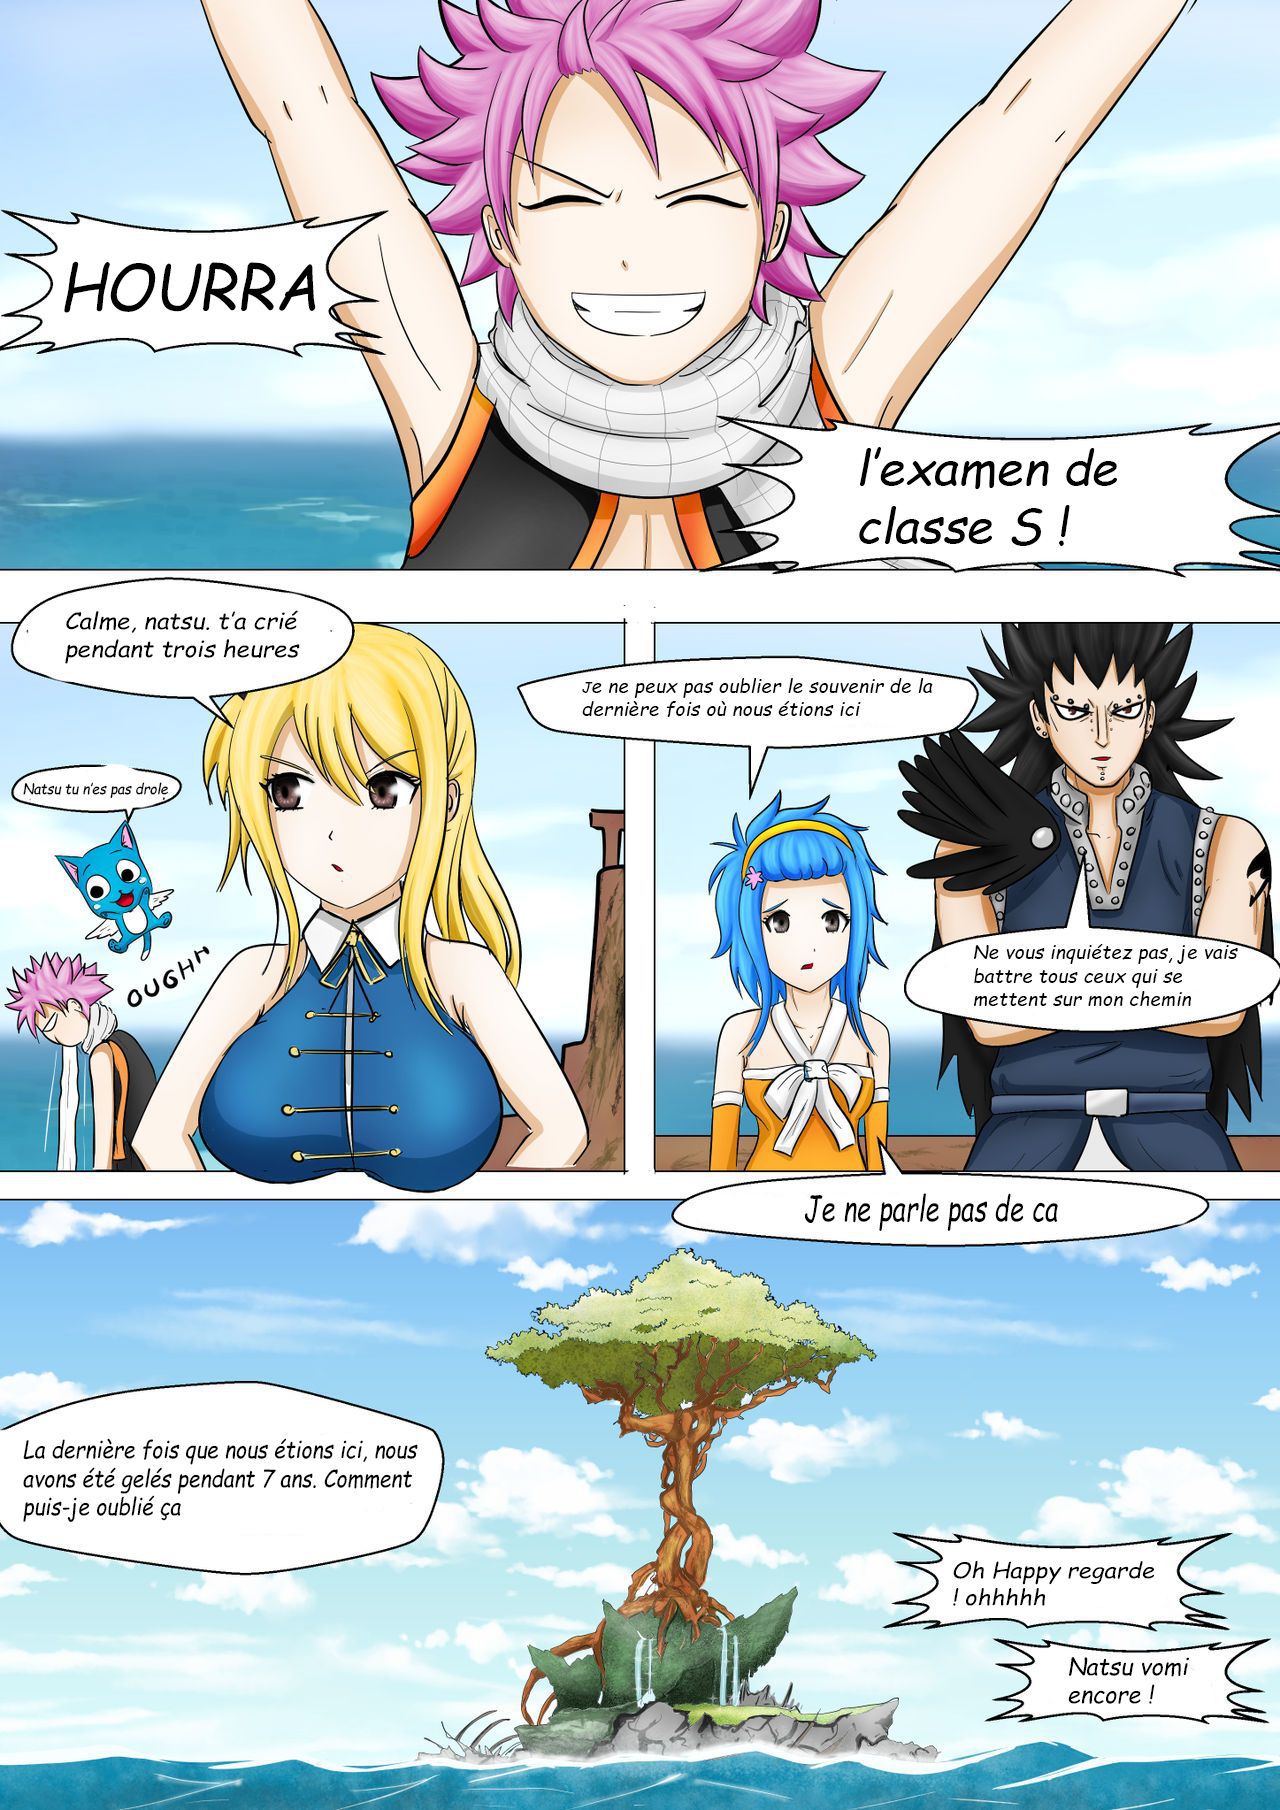 [EscapeFromExpansion] A Huger Game (Fairy Tail) [FRENCH] 2